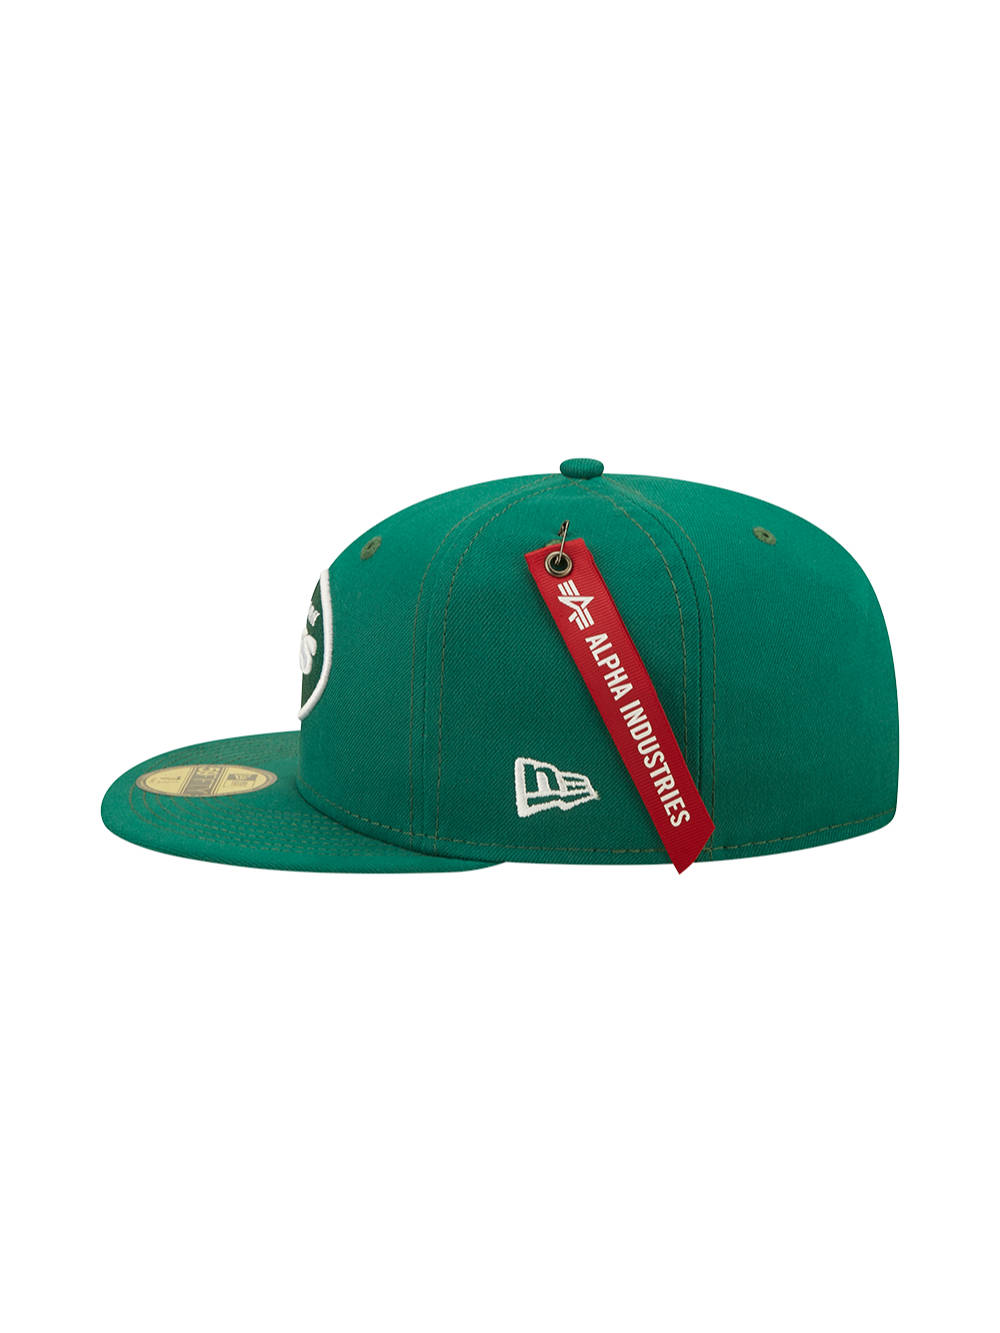 NEW YORK JETS X ALPHA X NEW ERA 59FIFTY FITTED CAP ACCESSORY Alpha Industries 